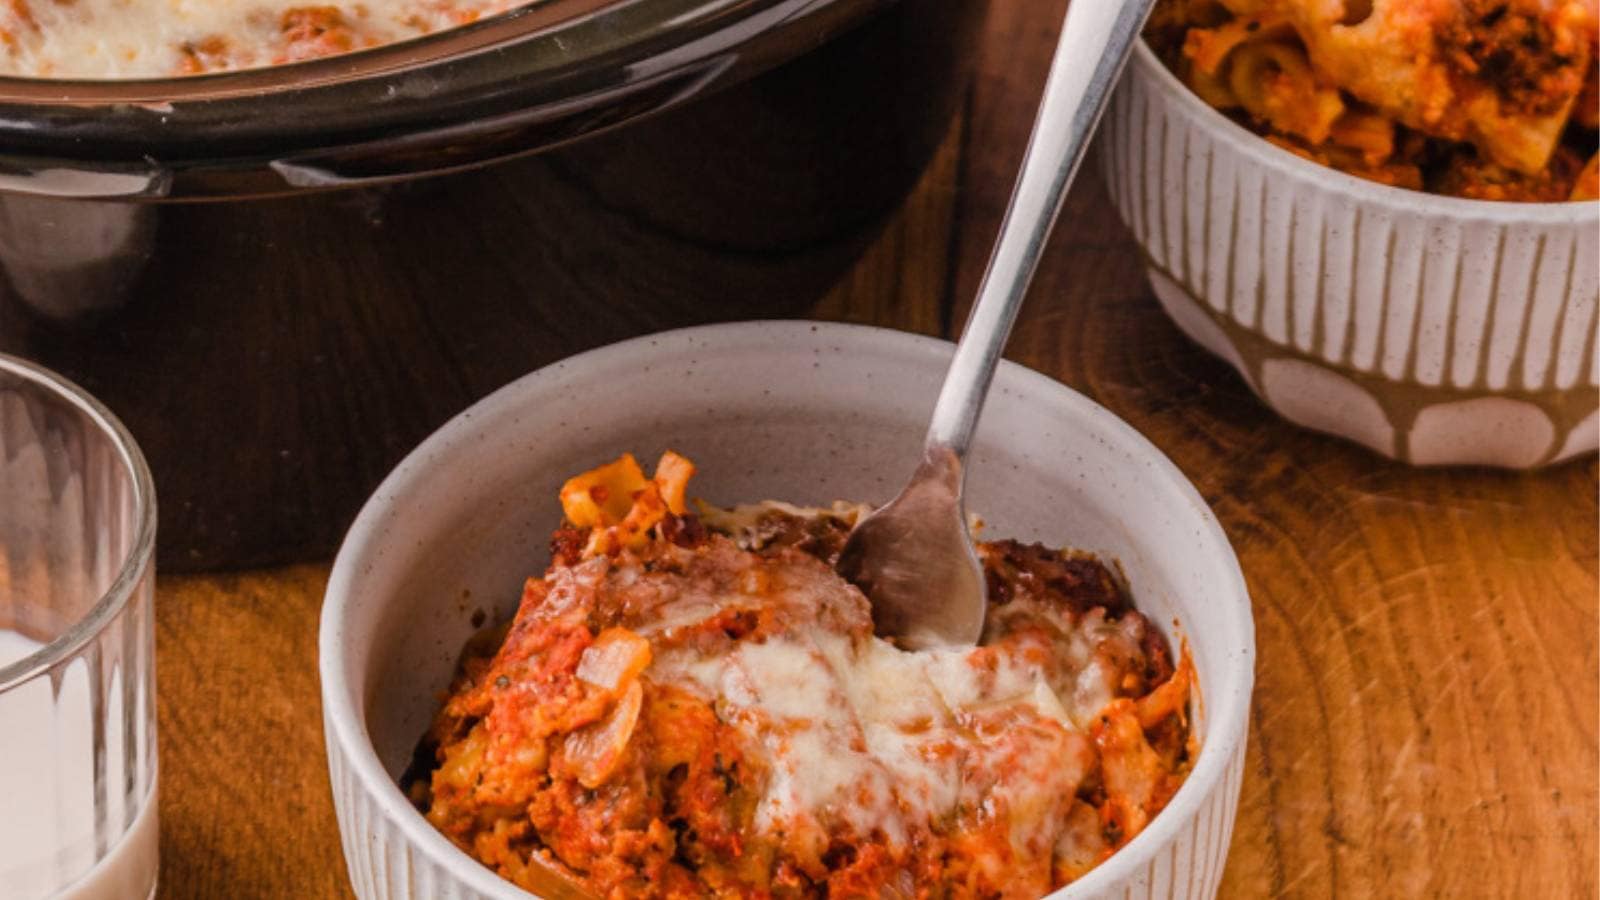 Slow Cooker Baked Ziti recipe by Cookin Chicks.